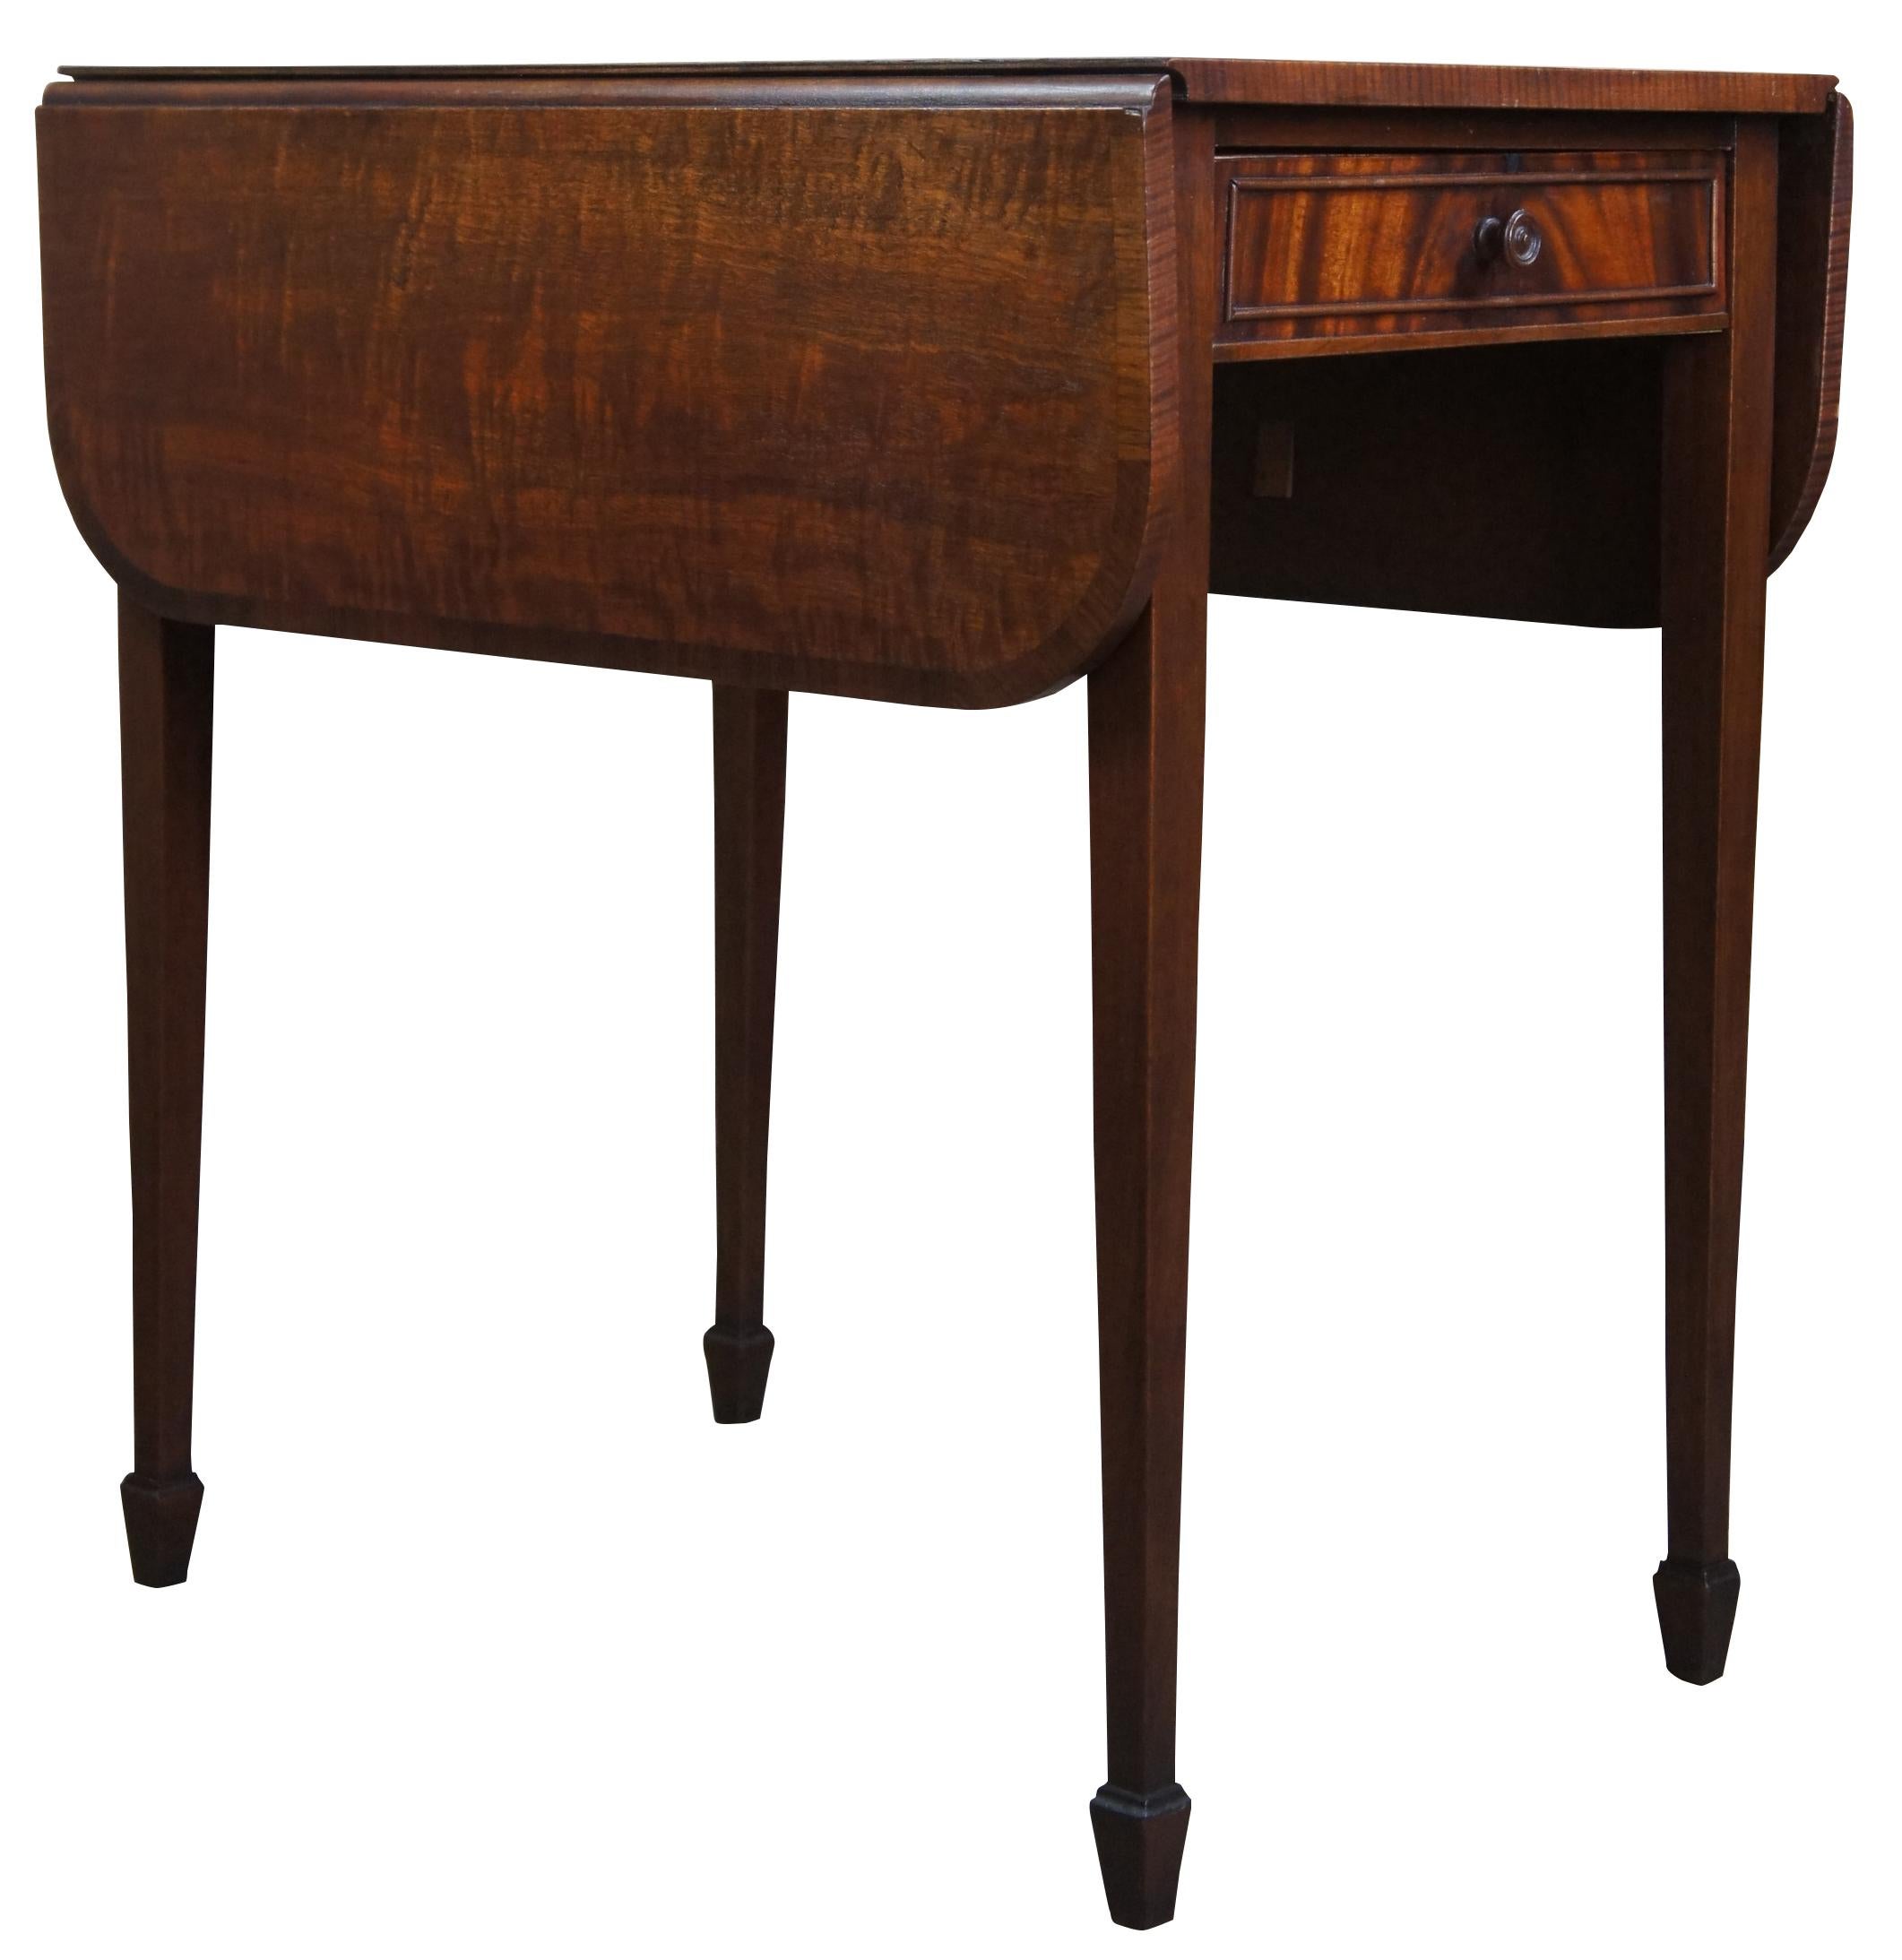 A stunning pair of antique drop leaf end tables by Imperial Furniture Co. Imperial operated out of Grand Rapids, Michigan between 1903-1954. Made from genuine mahogany in sheraton styling with spade feet. Each piece features a flame mahogany front